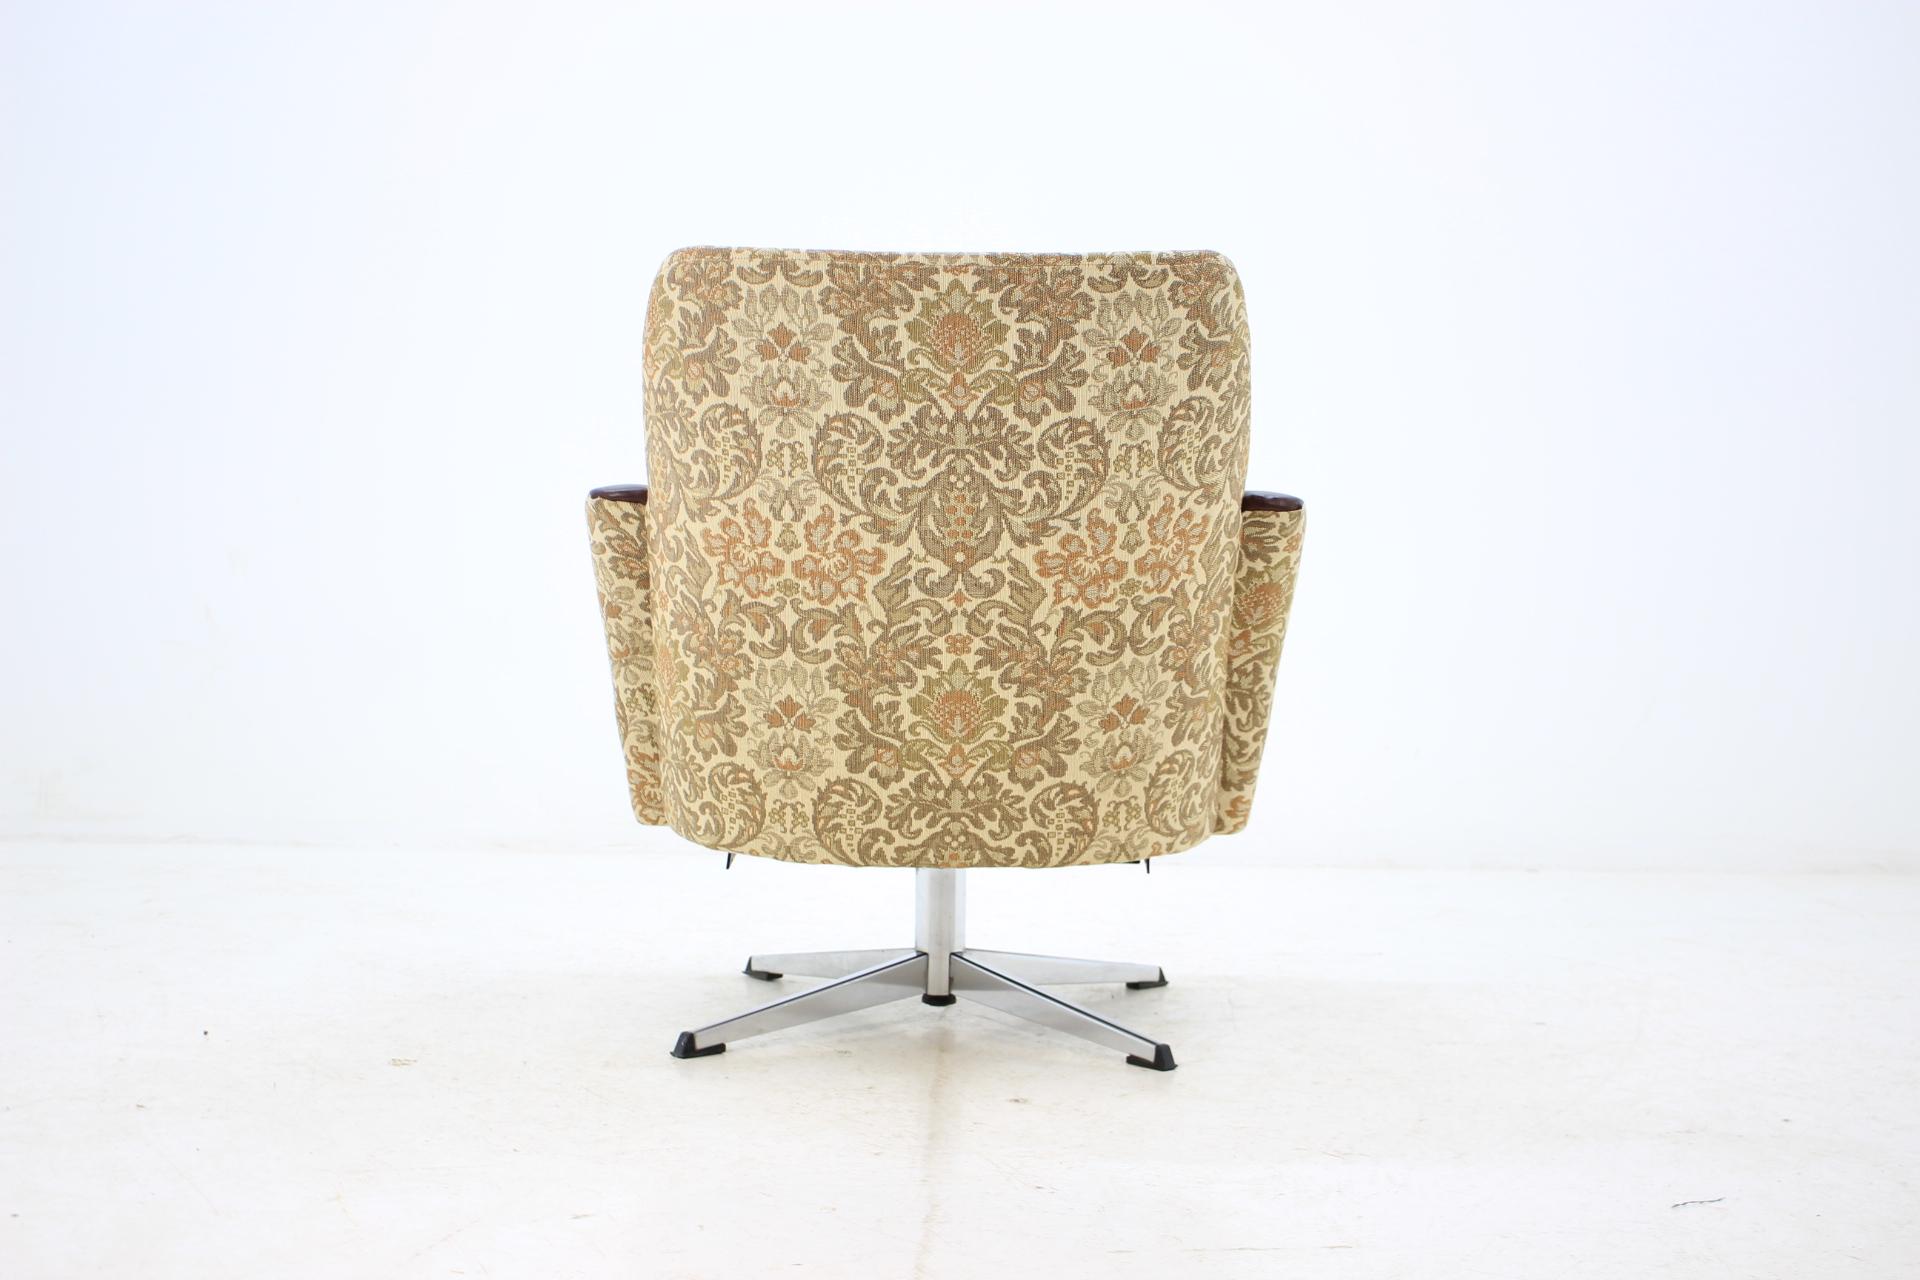 German Midcentury Swivel Chairs, 1970s For Sale